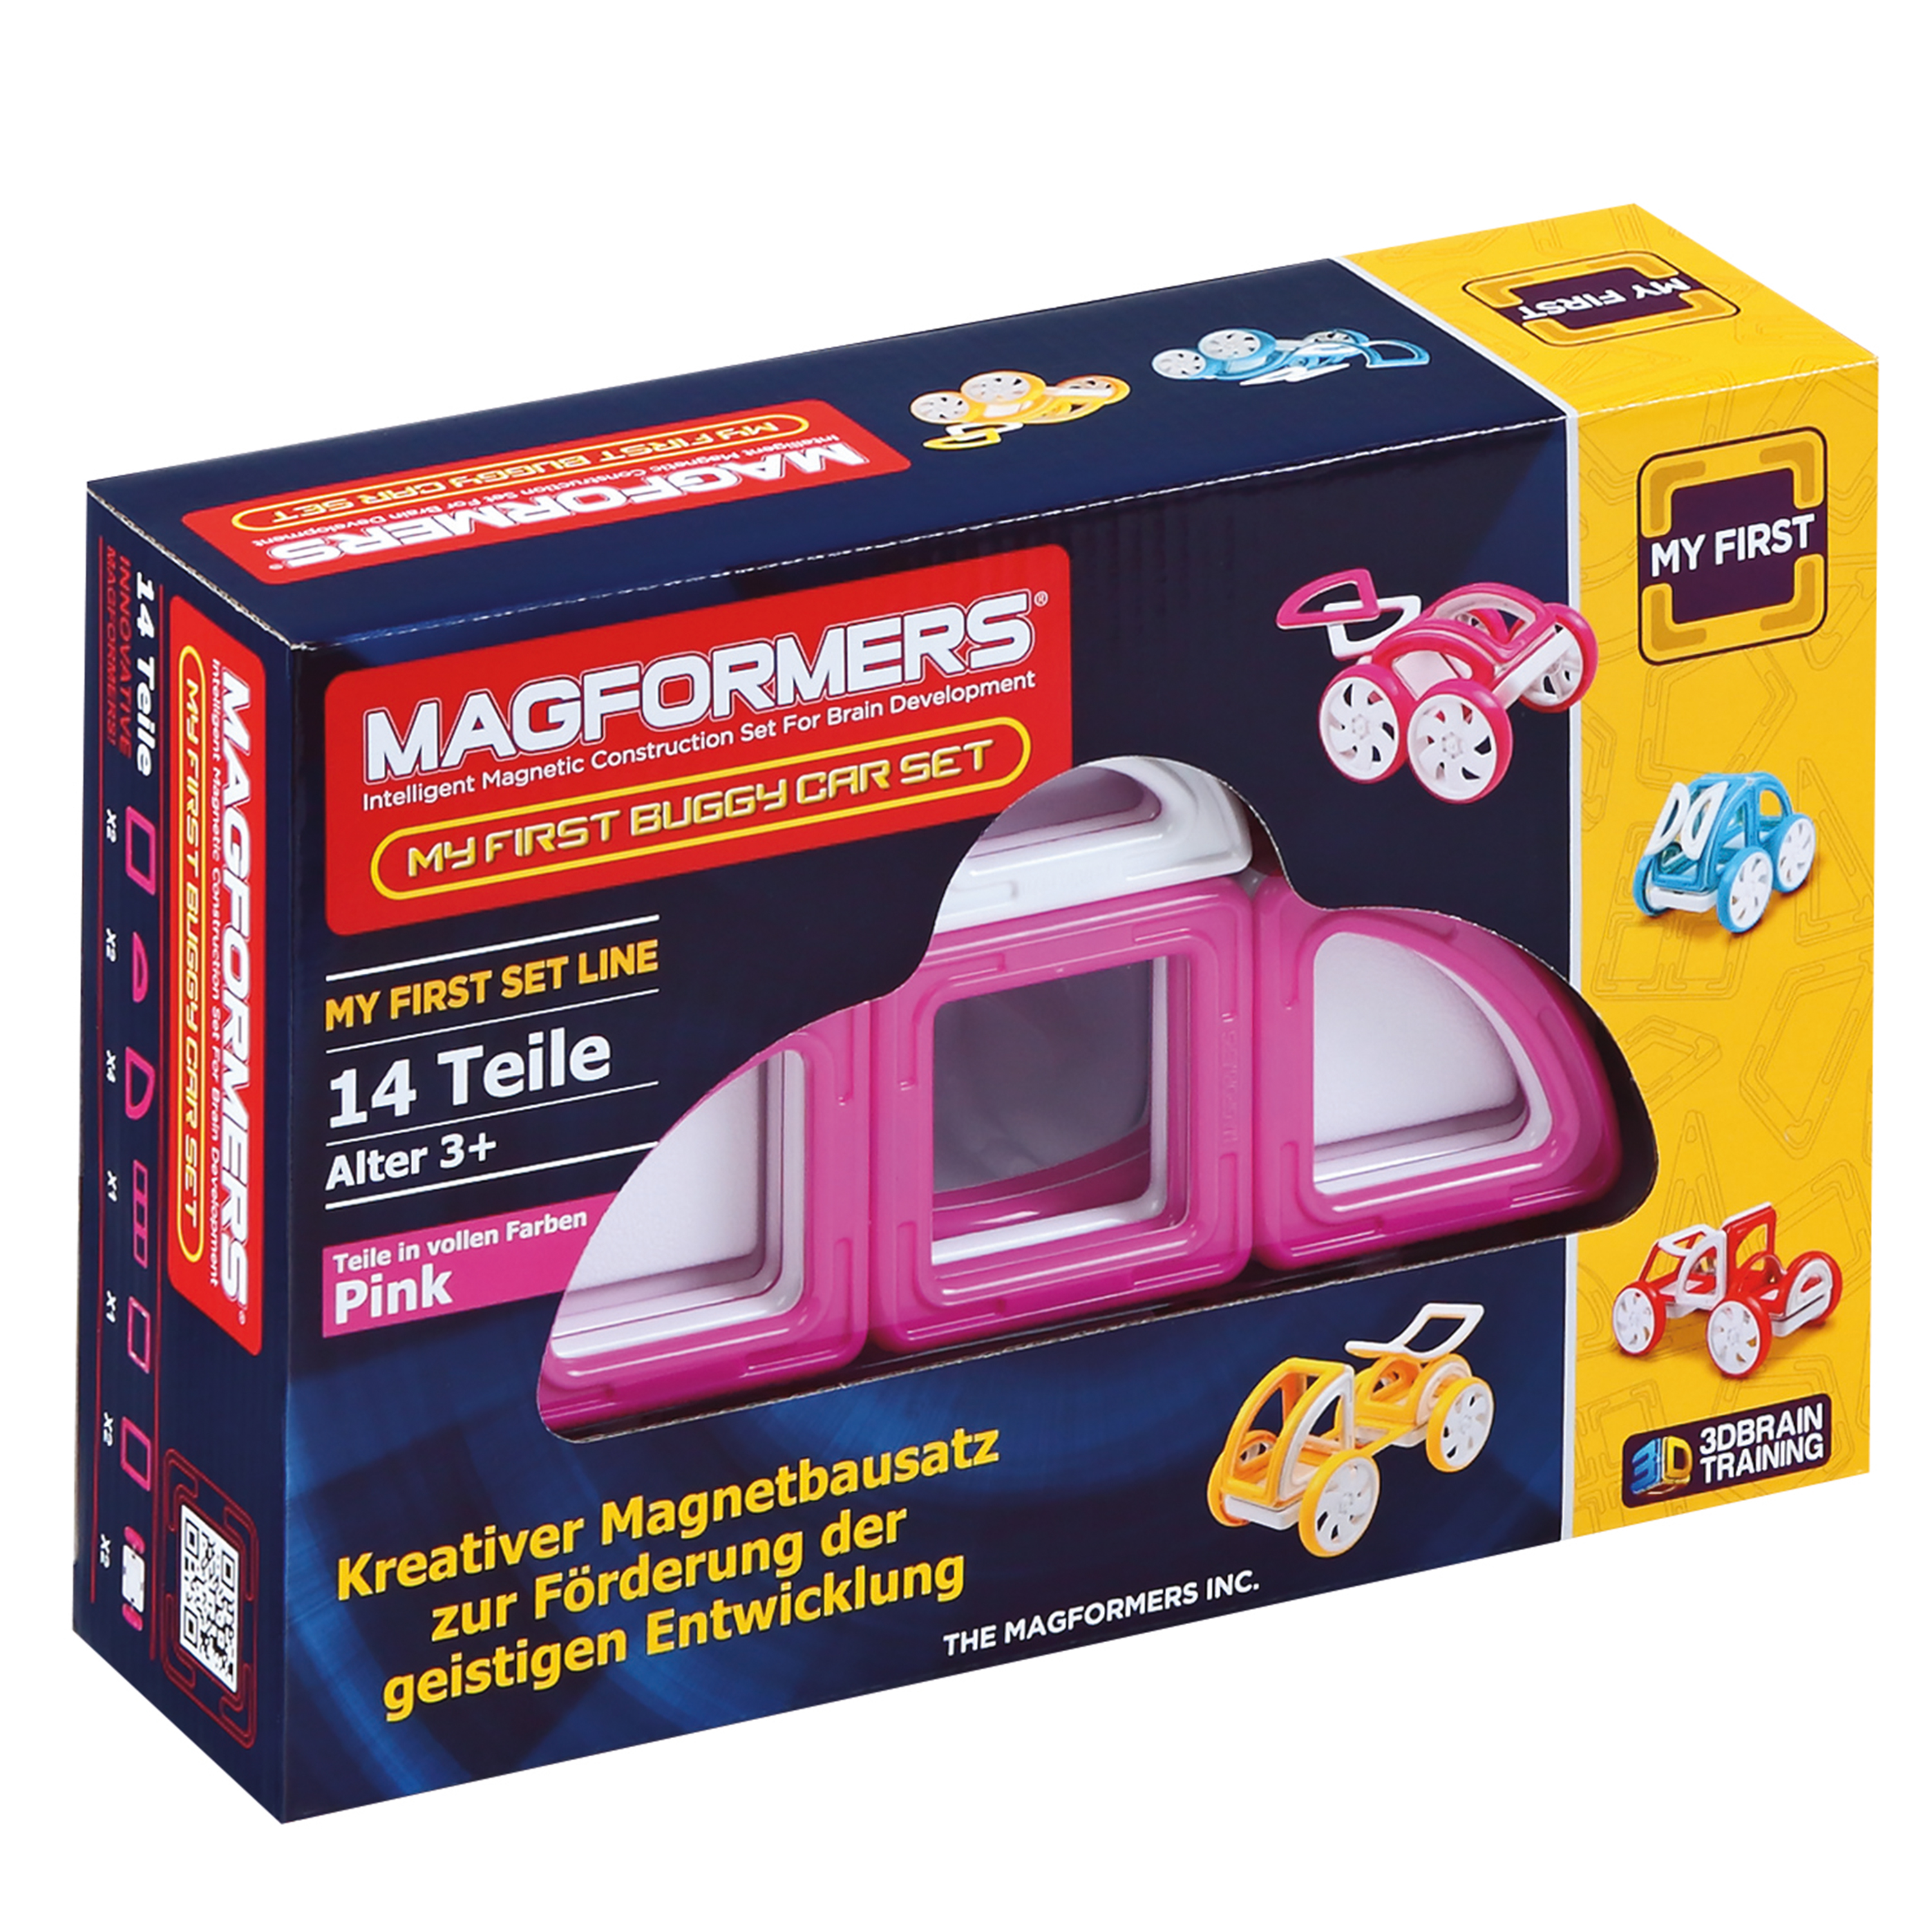 My First Magformers 'Buggy Car pink', 14 Teile